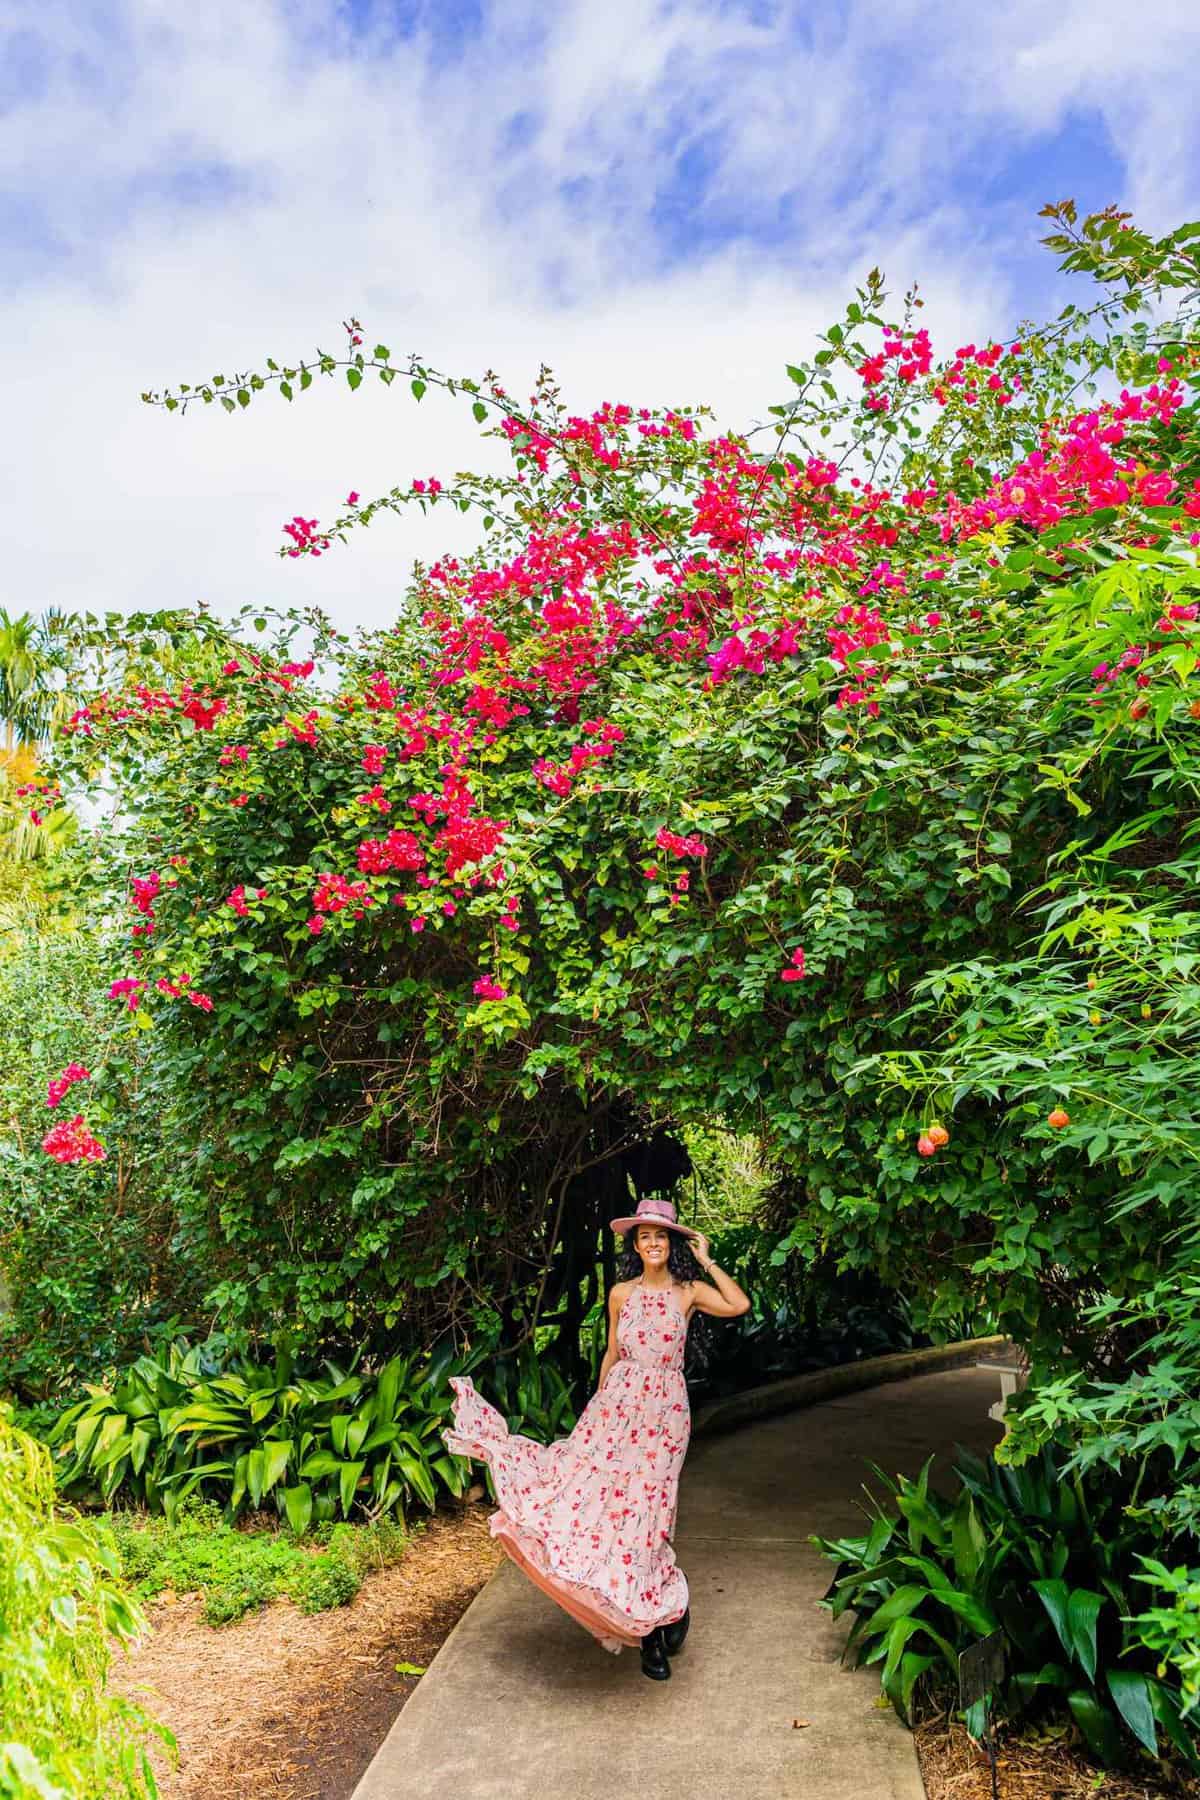 Jessica standing under some flowers in a garden in St. Petersburg Romantic Things to Do Date Ideas Couples